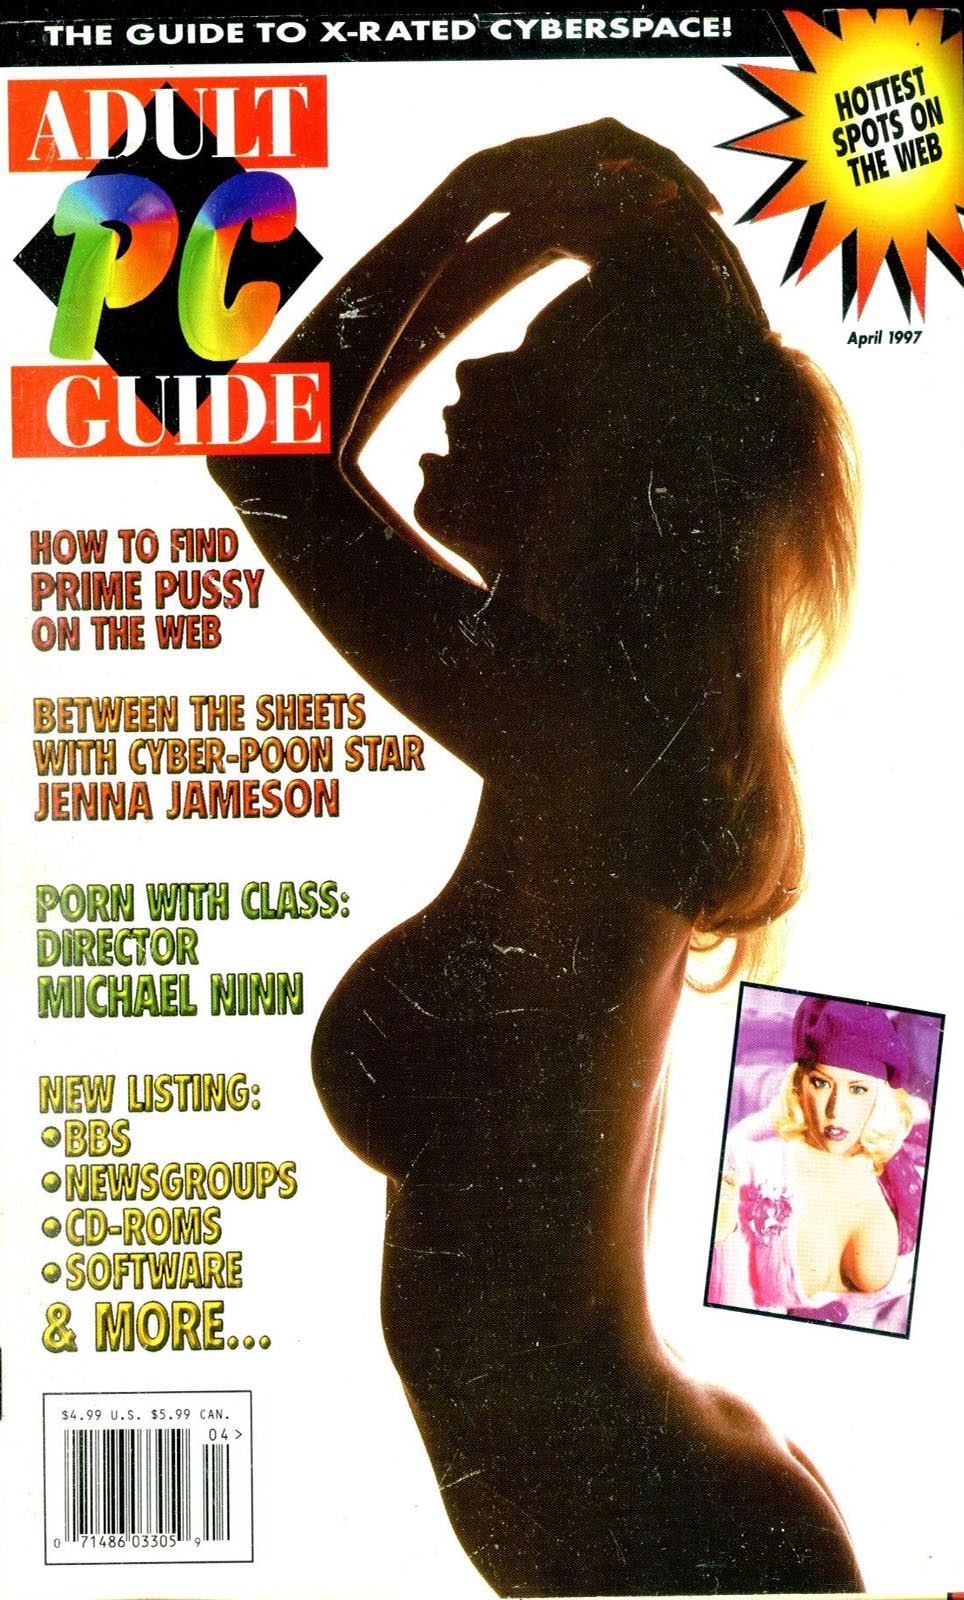 Adult PC Guide April 1997 magazine back issue Adult PC Guide magizine back copy 